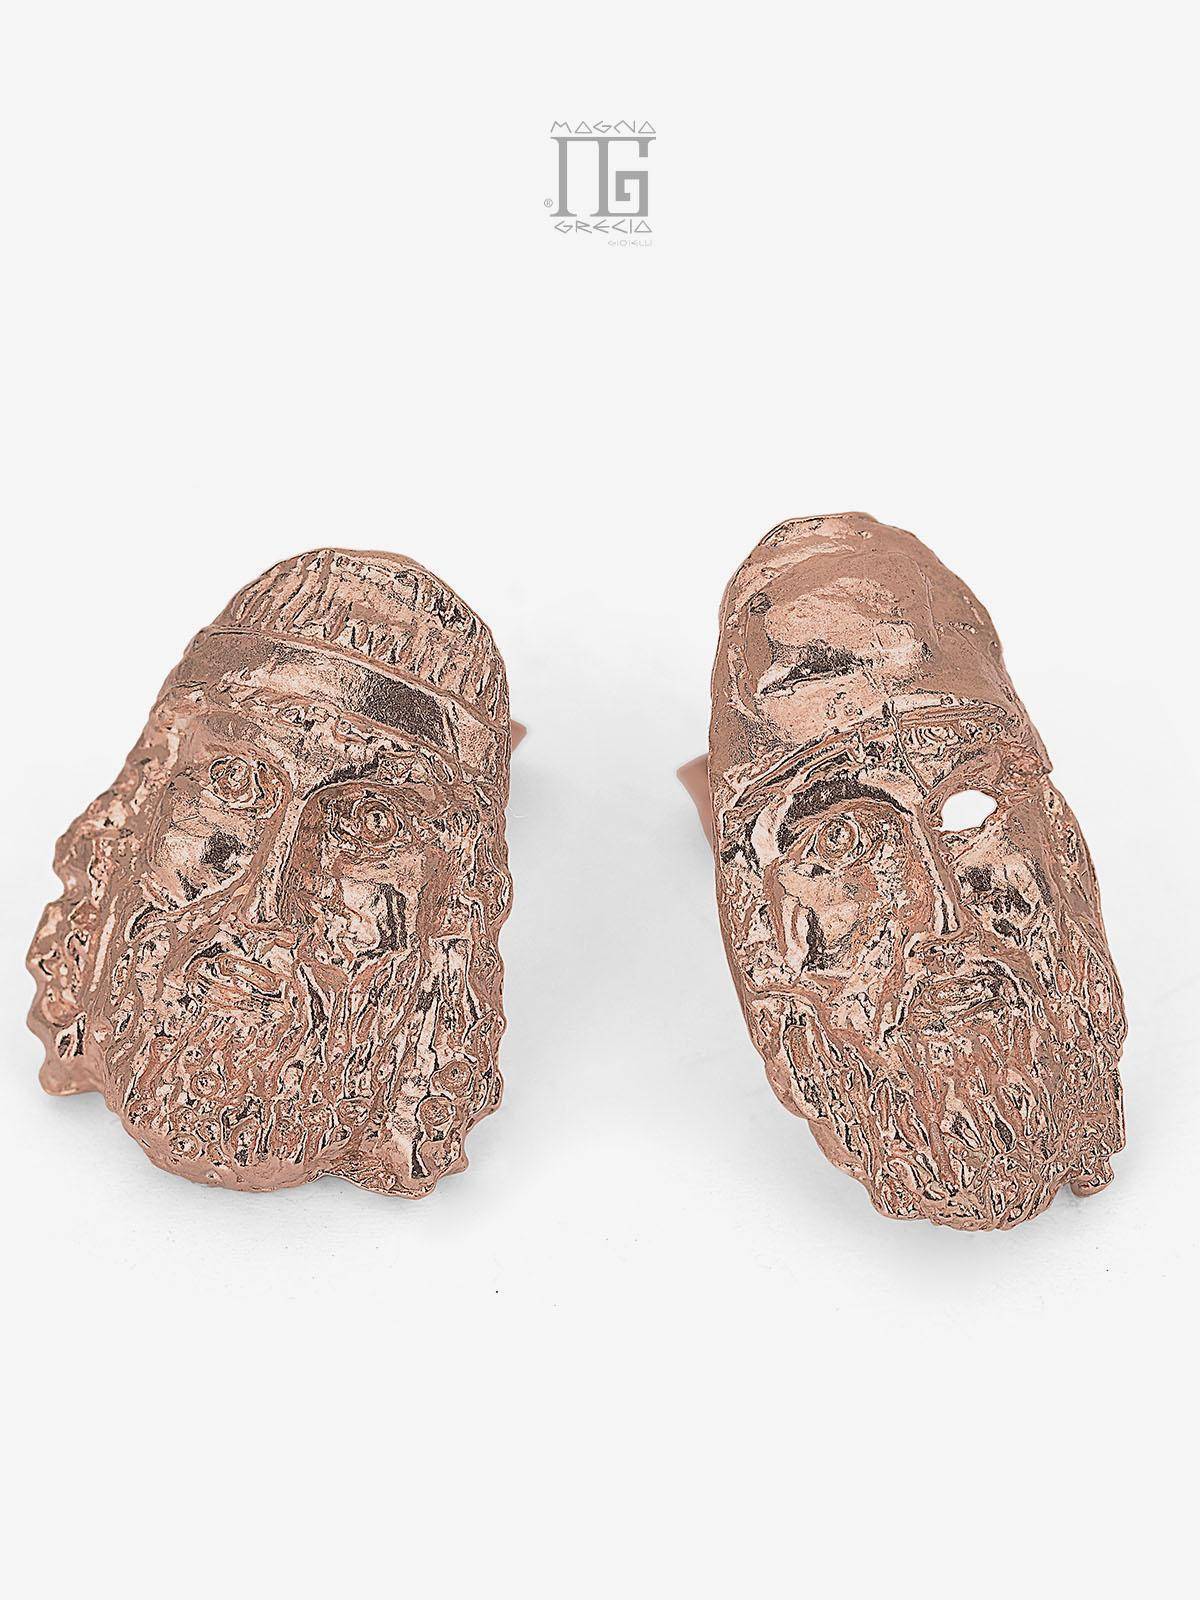 Silver earrings depicting the face of the Riace Bronzes Cod. MGK 4117 V